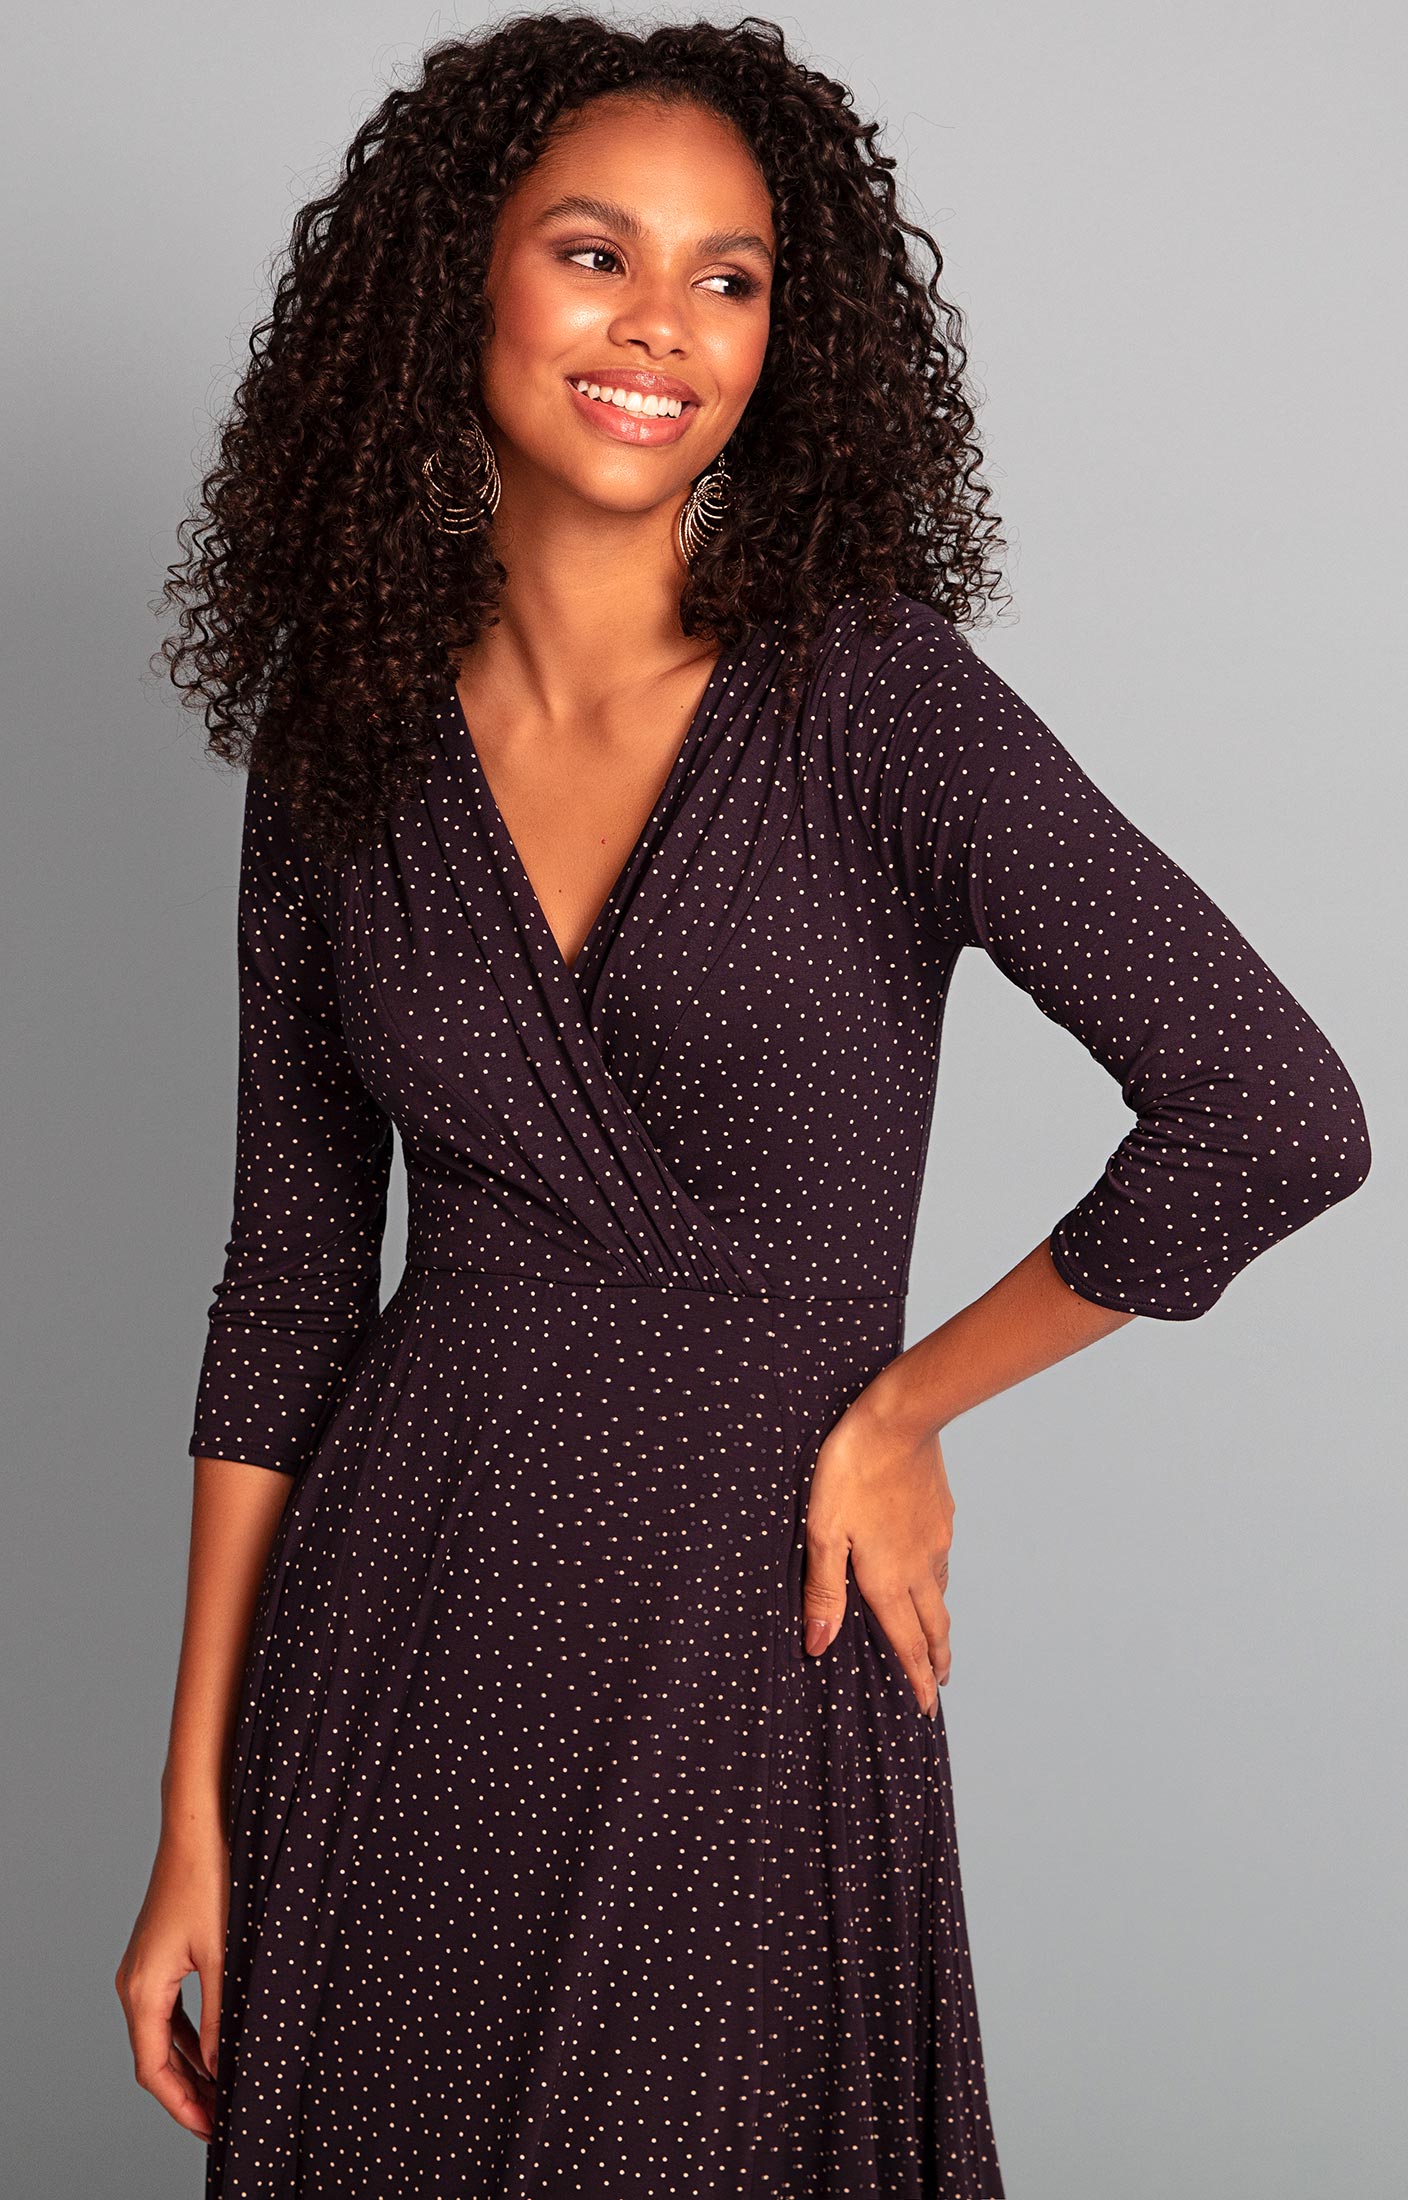 Annie Dress Polka Dot Navy - Wedding Dresses, Evening Wear and Party Clothes  by Alie Street.